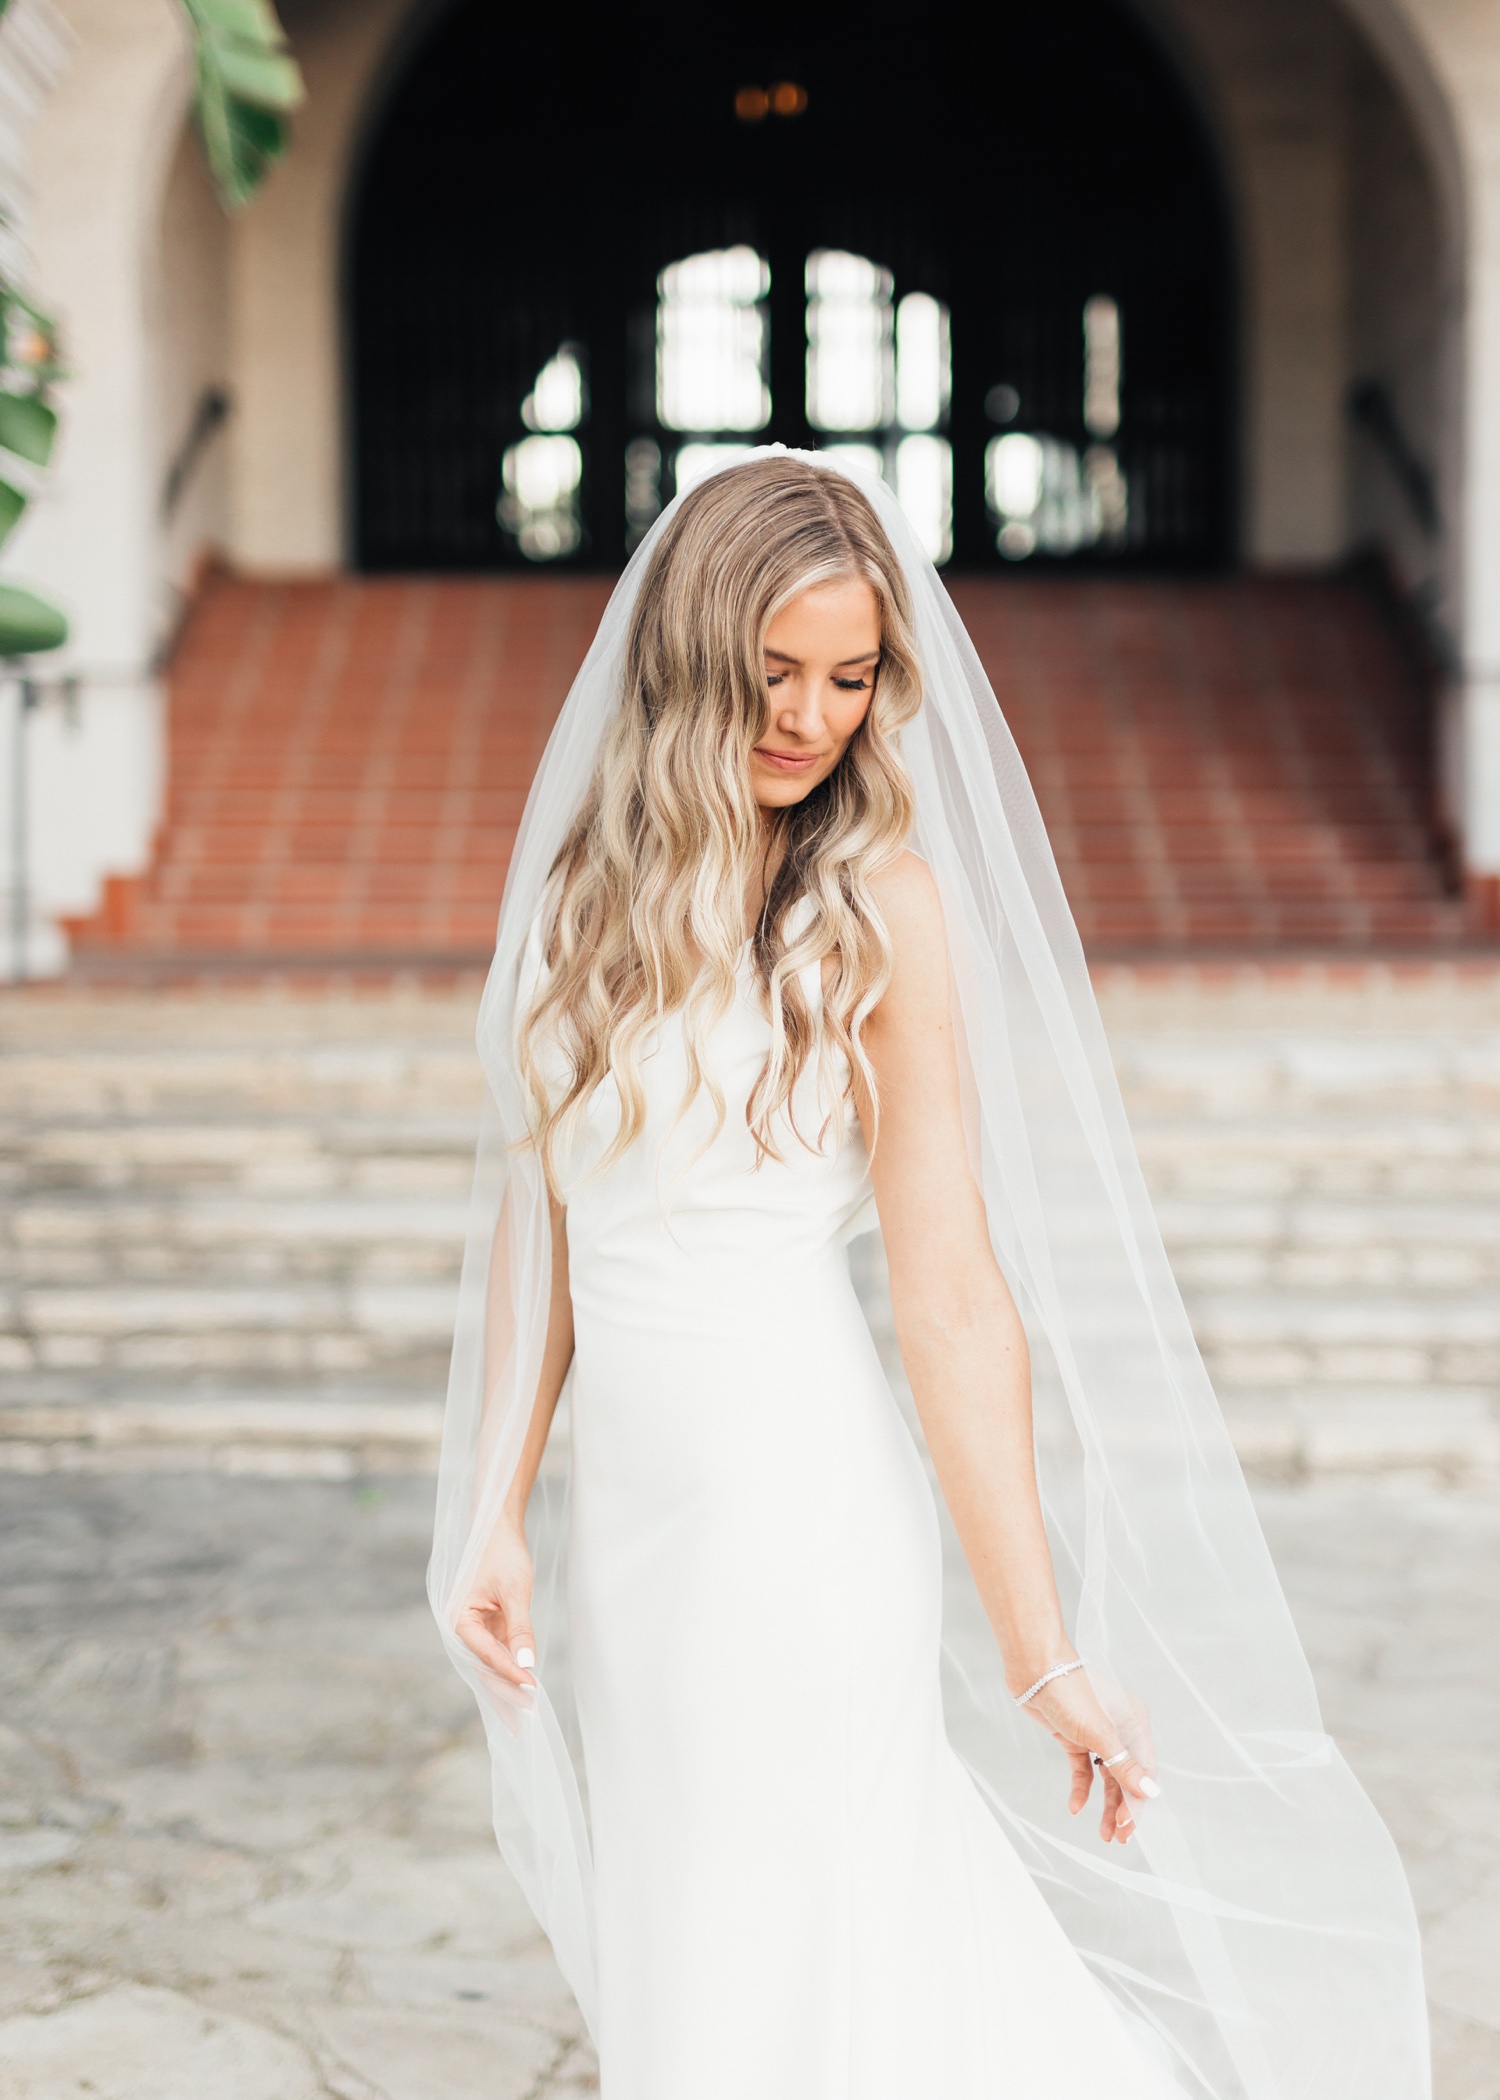 Editorial Elopement at the Denver Courthouse | Haley Hawn Photo